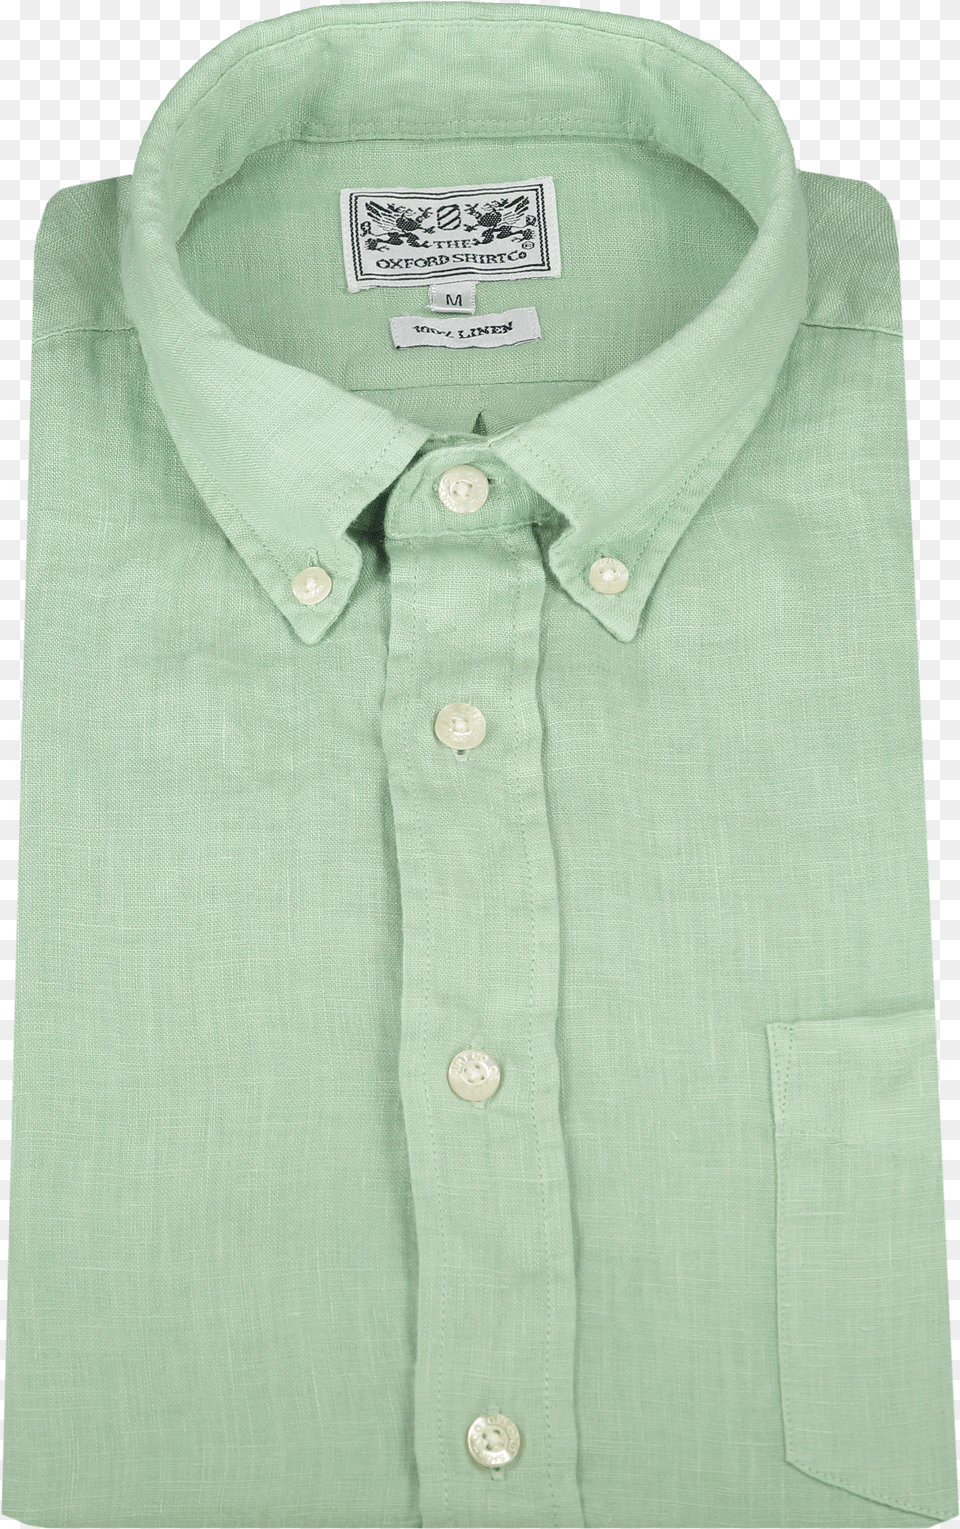 Linen Shirt With Button Down Collar In Pea Green Button Free Png